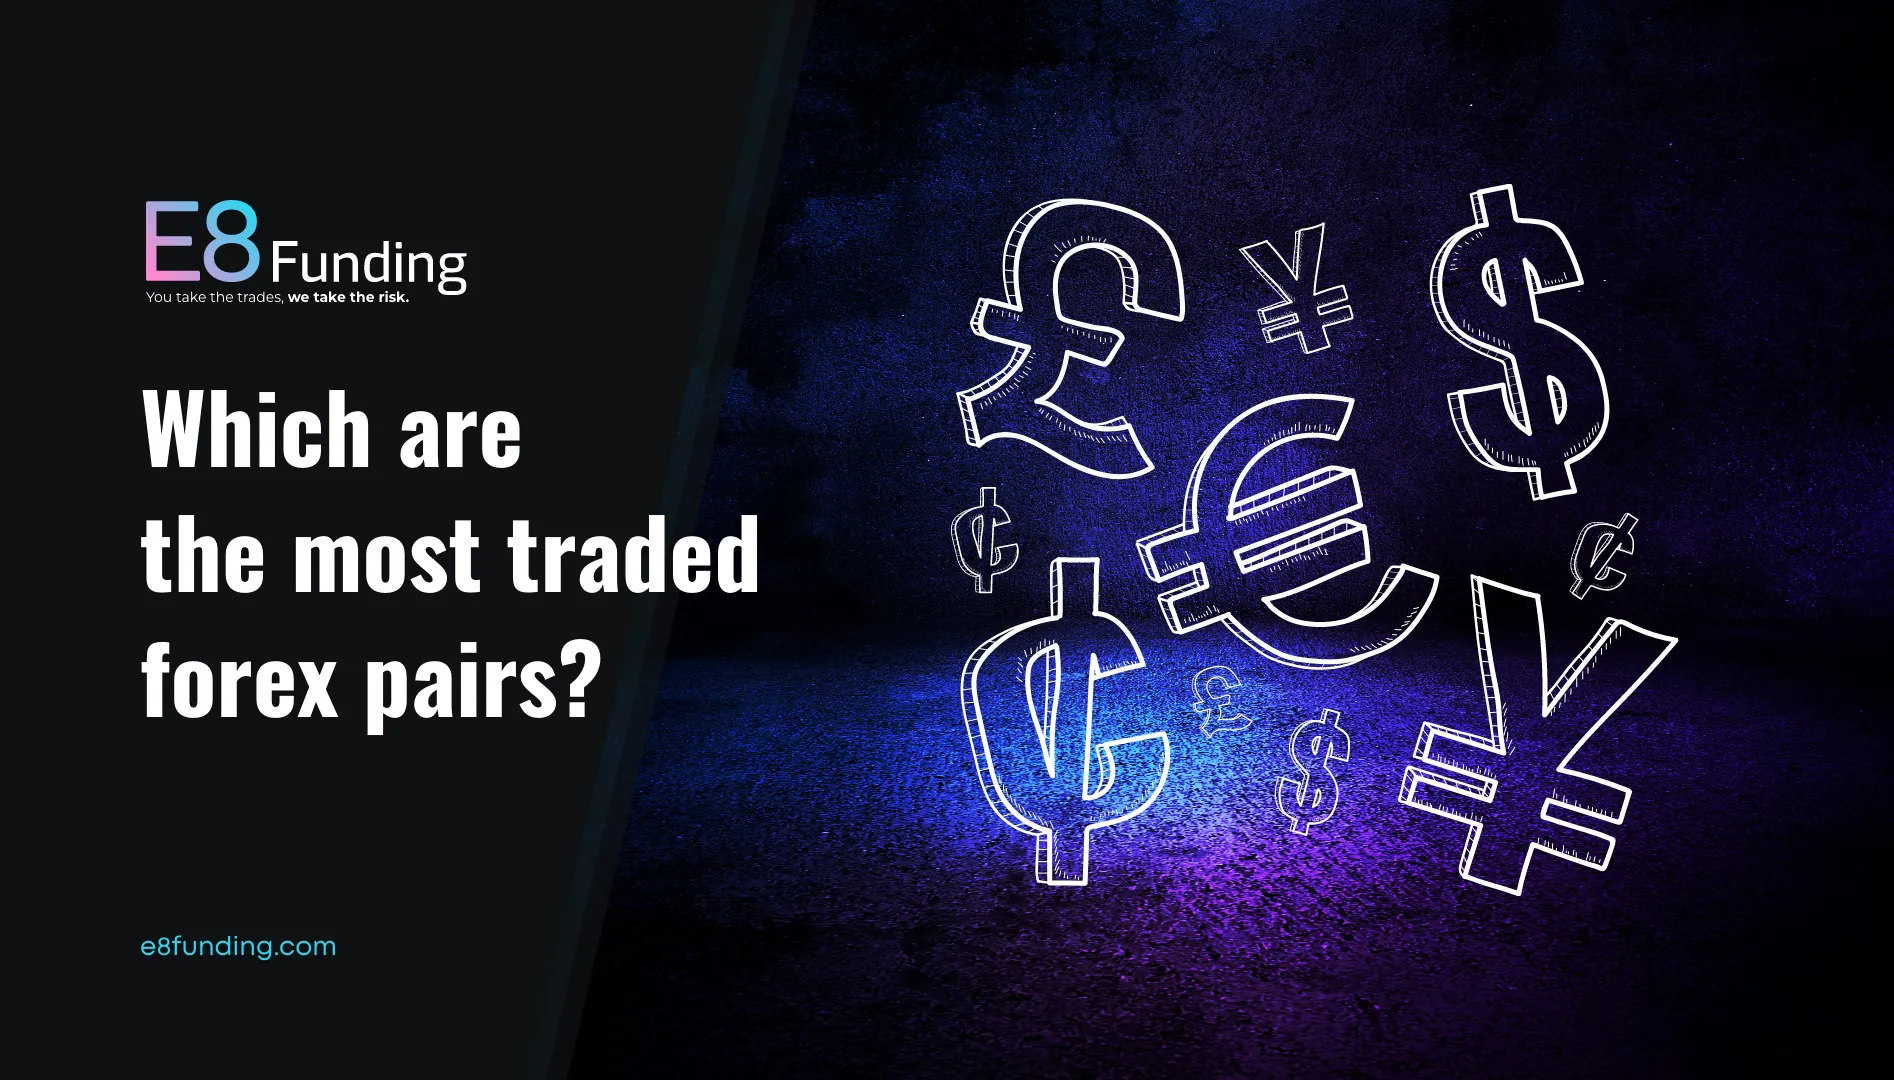 Top 5 Most Traded Forex Pairs Revealed